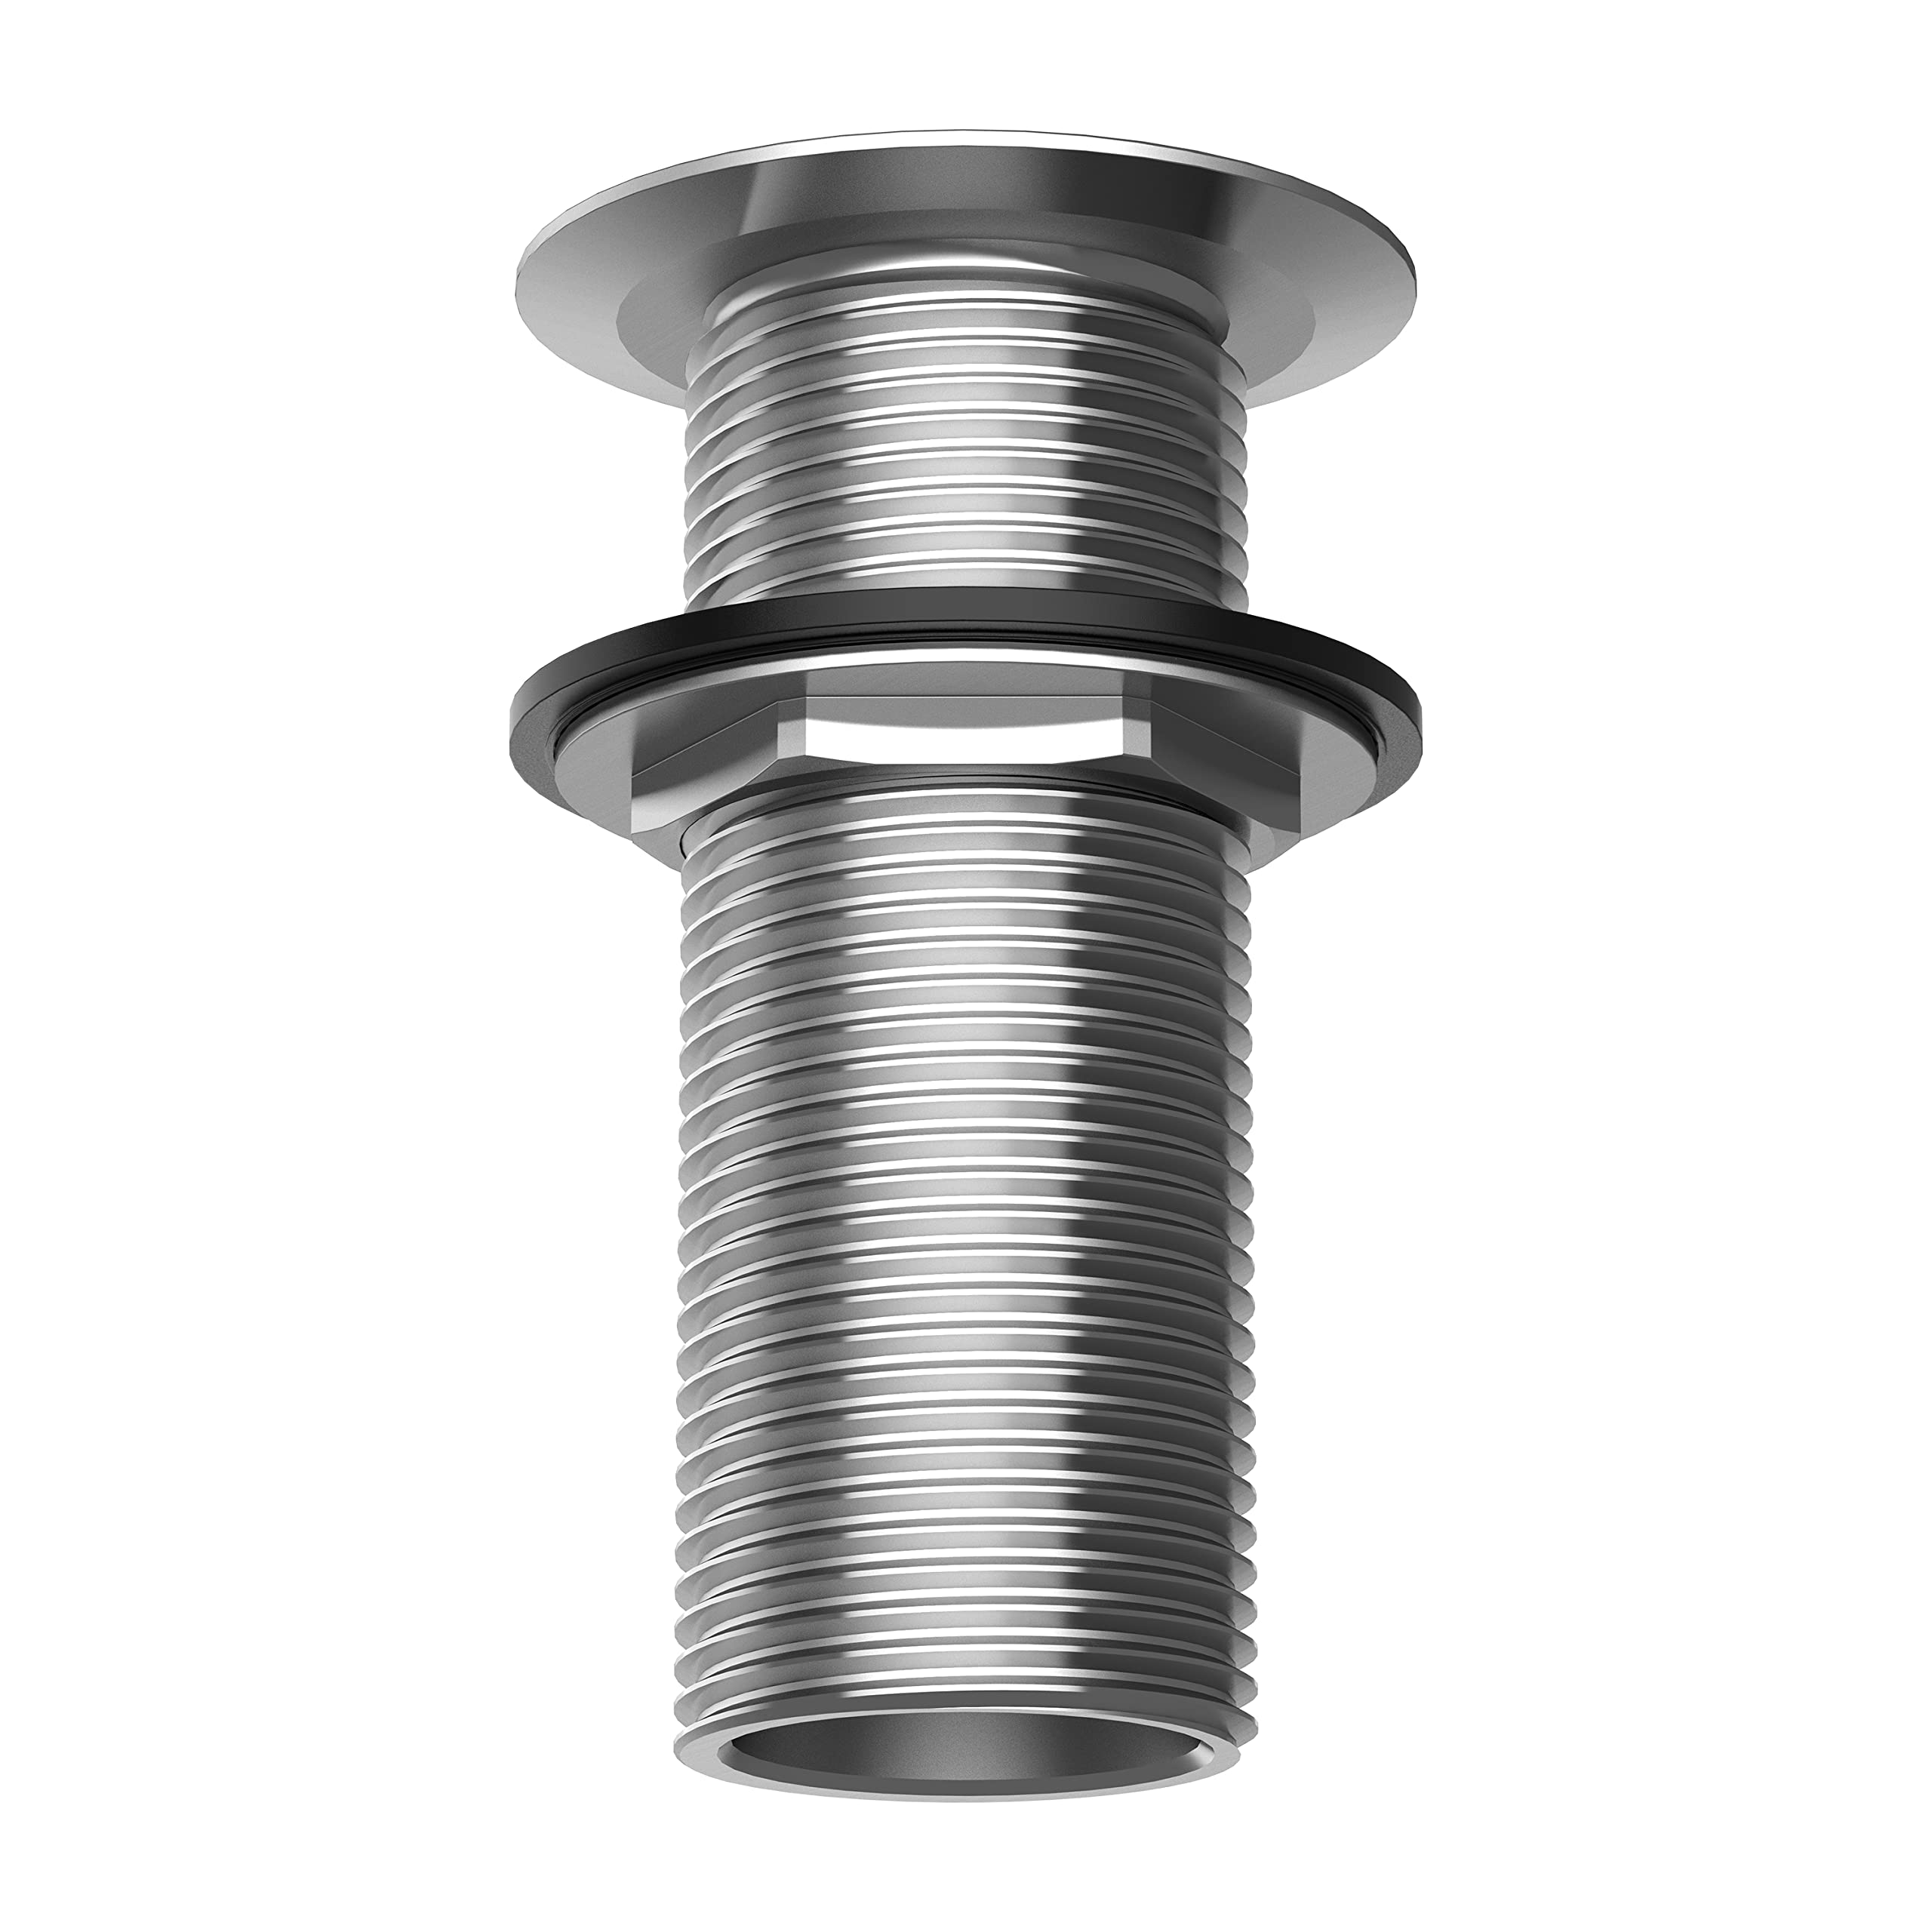 Leyso Stainless Steel Bar Sink Drain 1” Nominal Pipe Size 1" NPS Thread for 1-3/8" Sink Opening (3-1/4" Length Stainless Steel)